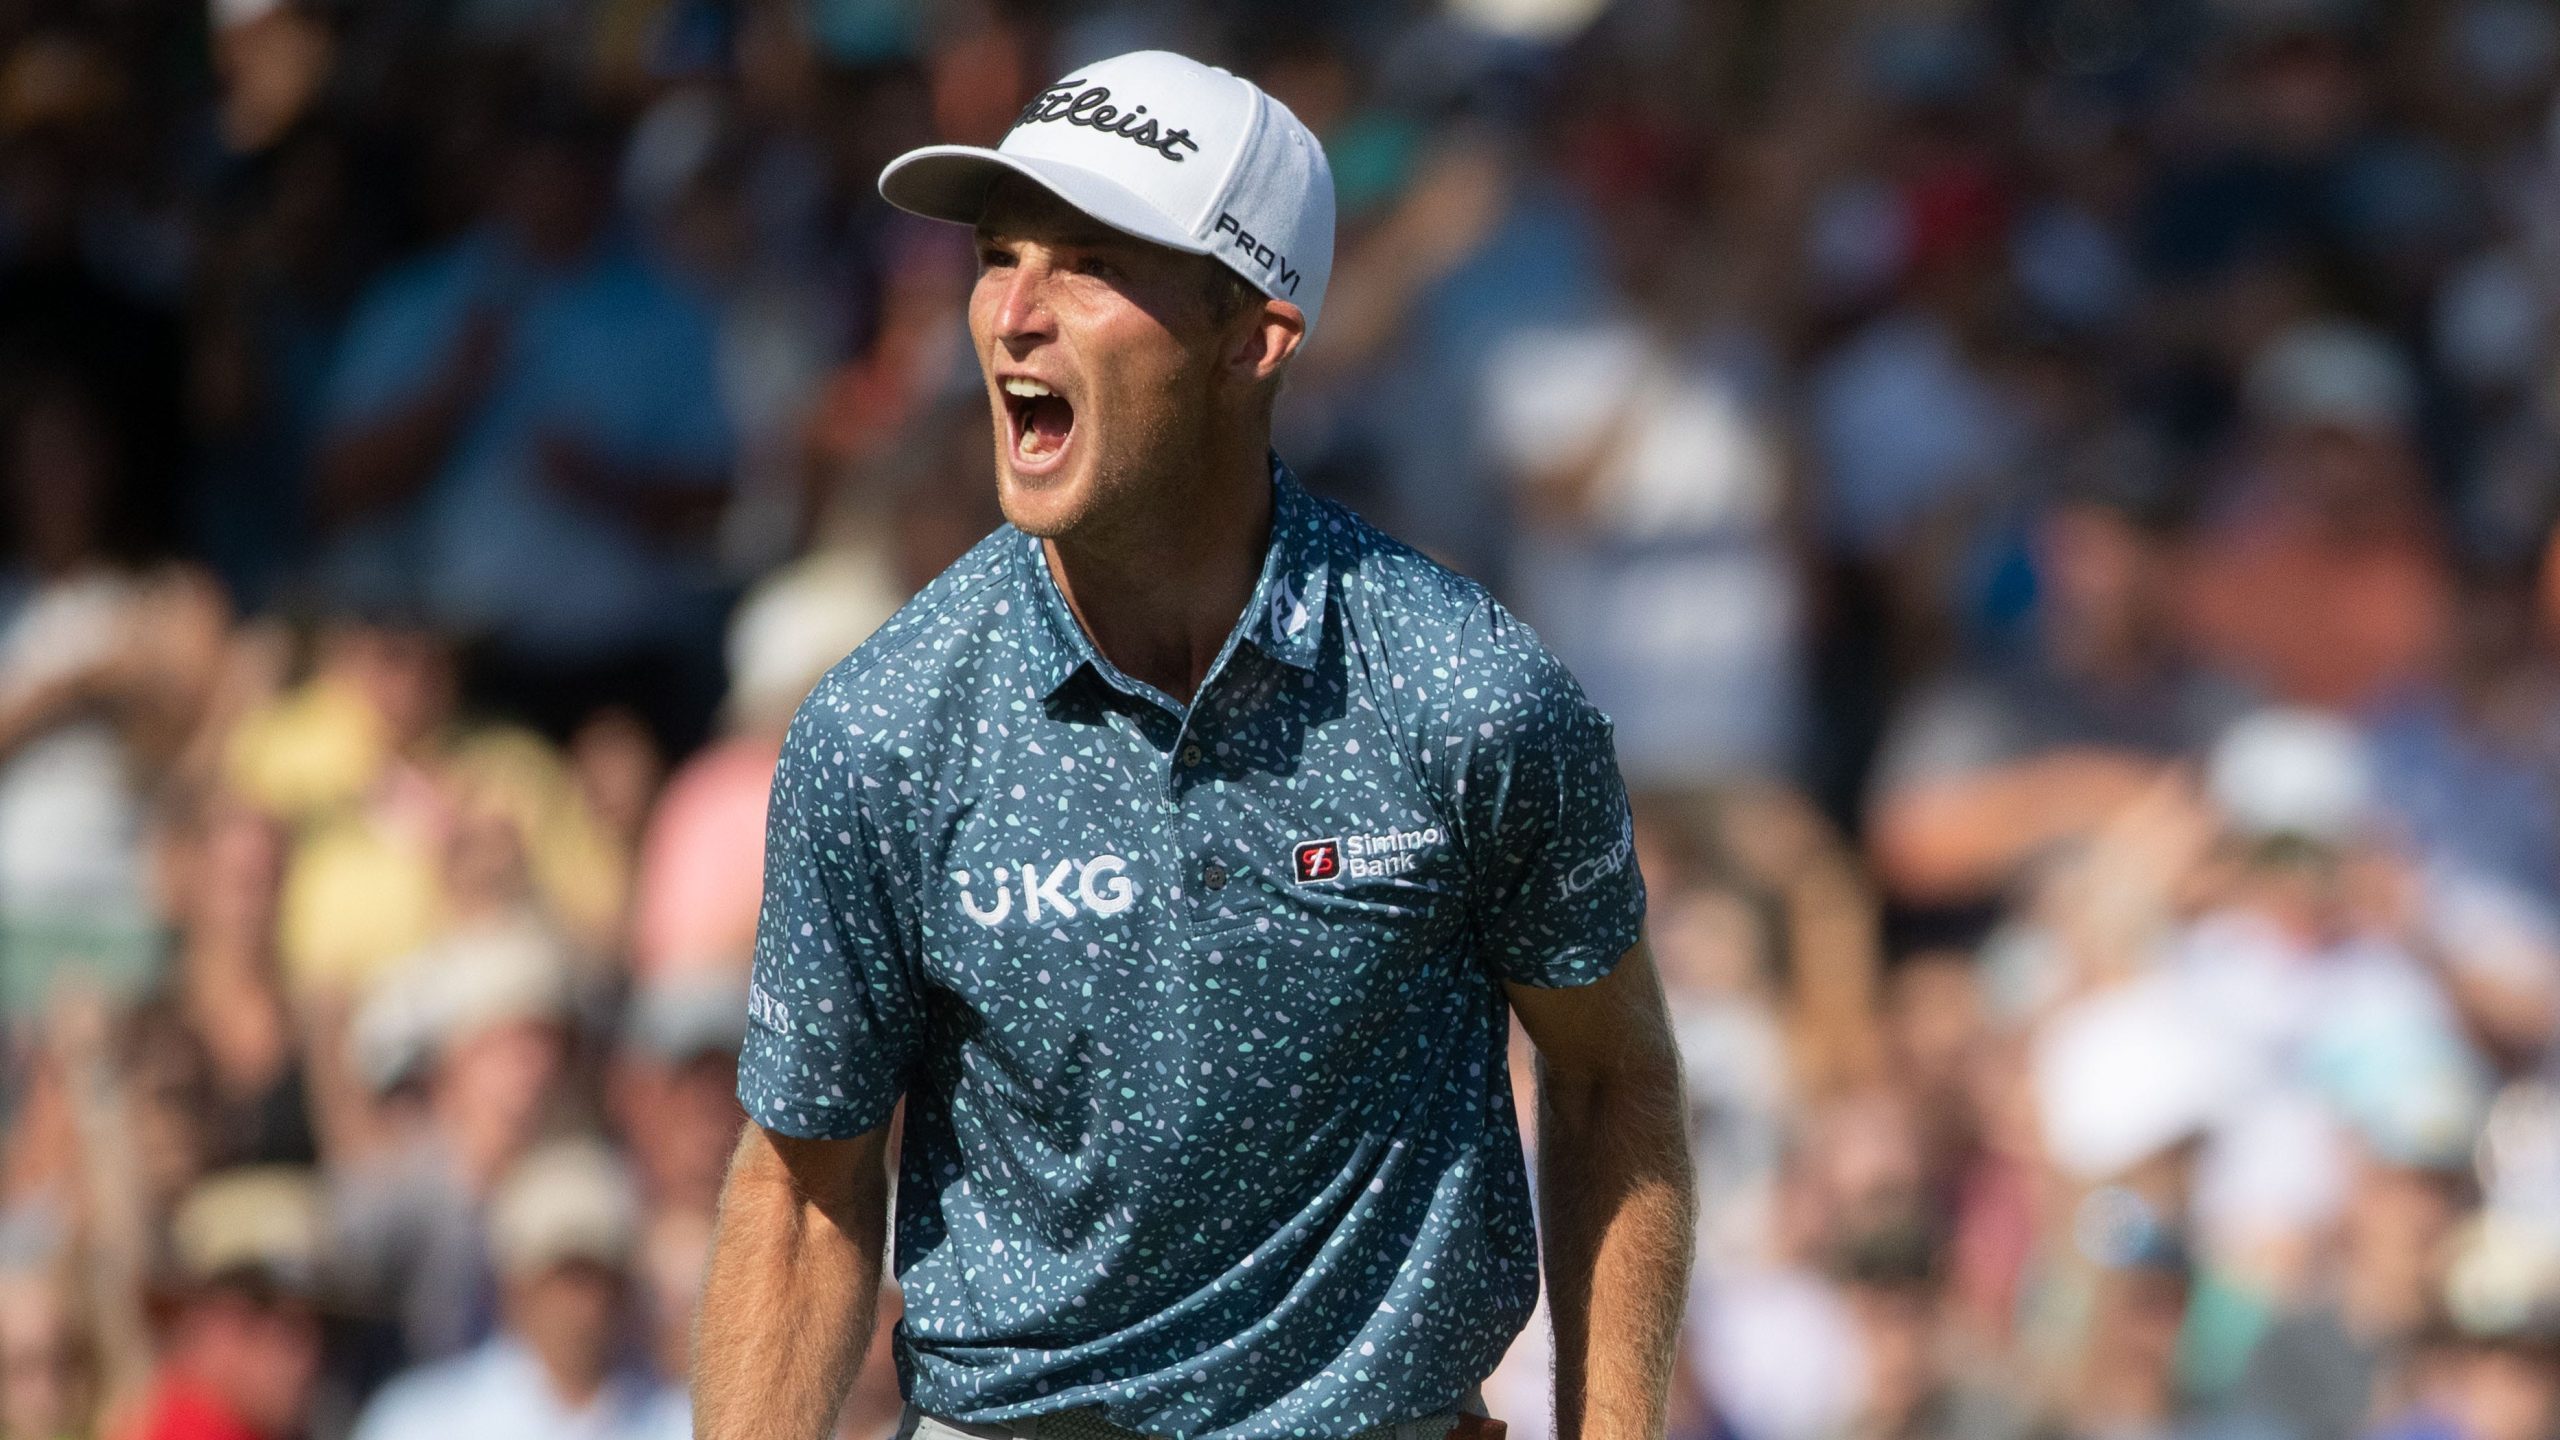 Will Zalatoris won his first PGA Tour event on Sunday, prevailing in a wild playoff